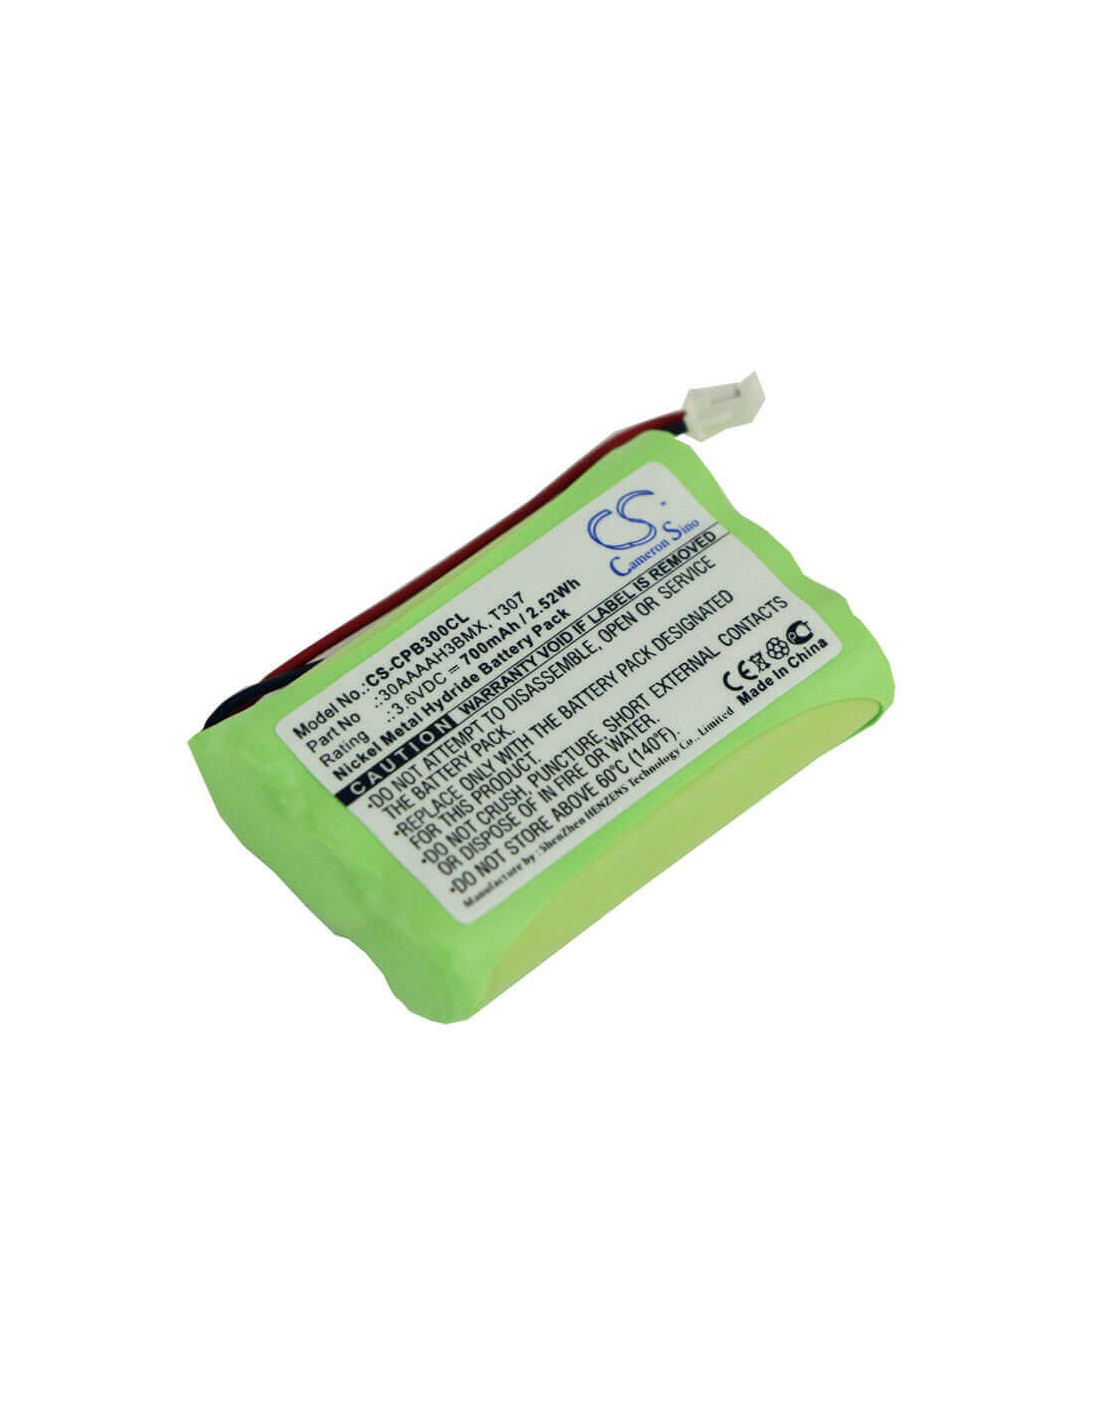 Battery for Gp, 30aaaah3bmx, T307 3.6V, 300mAh - 1.08Wh